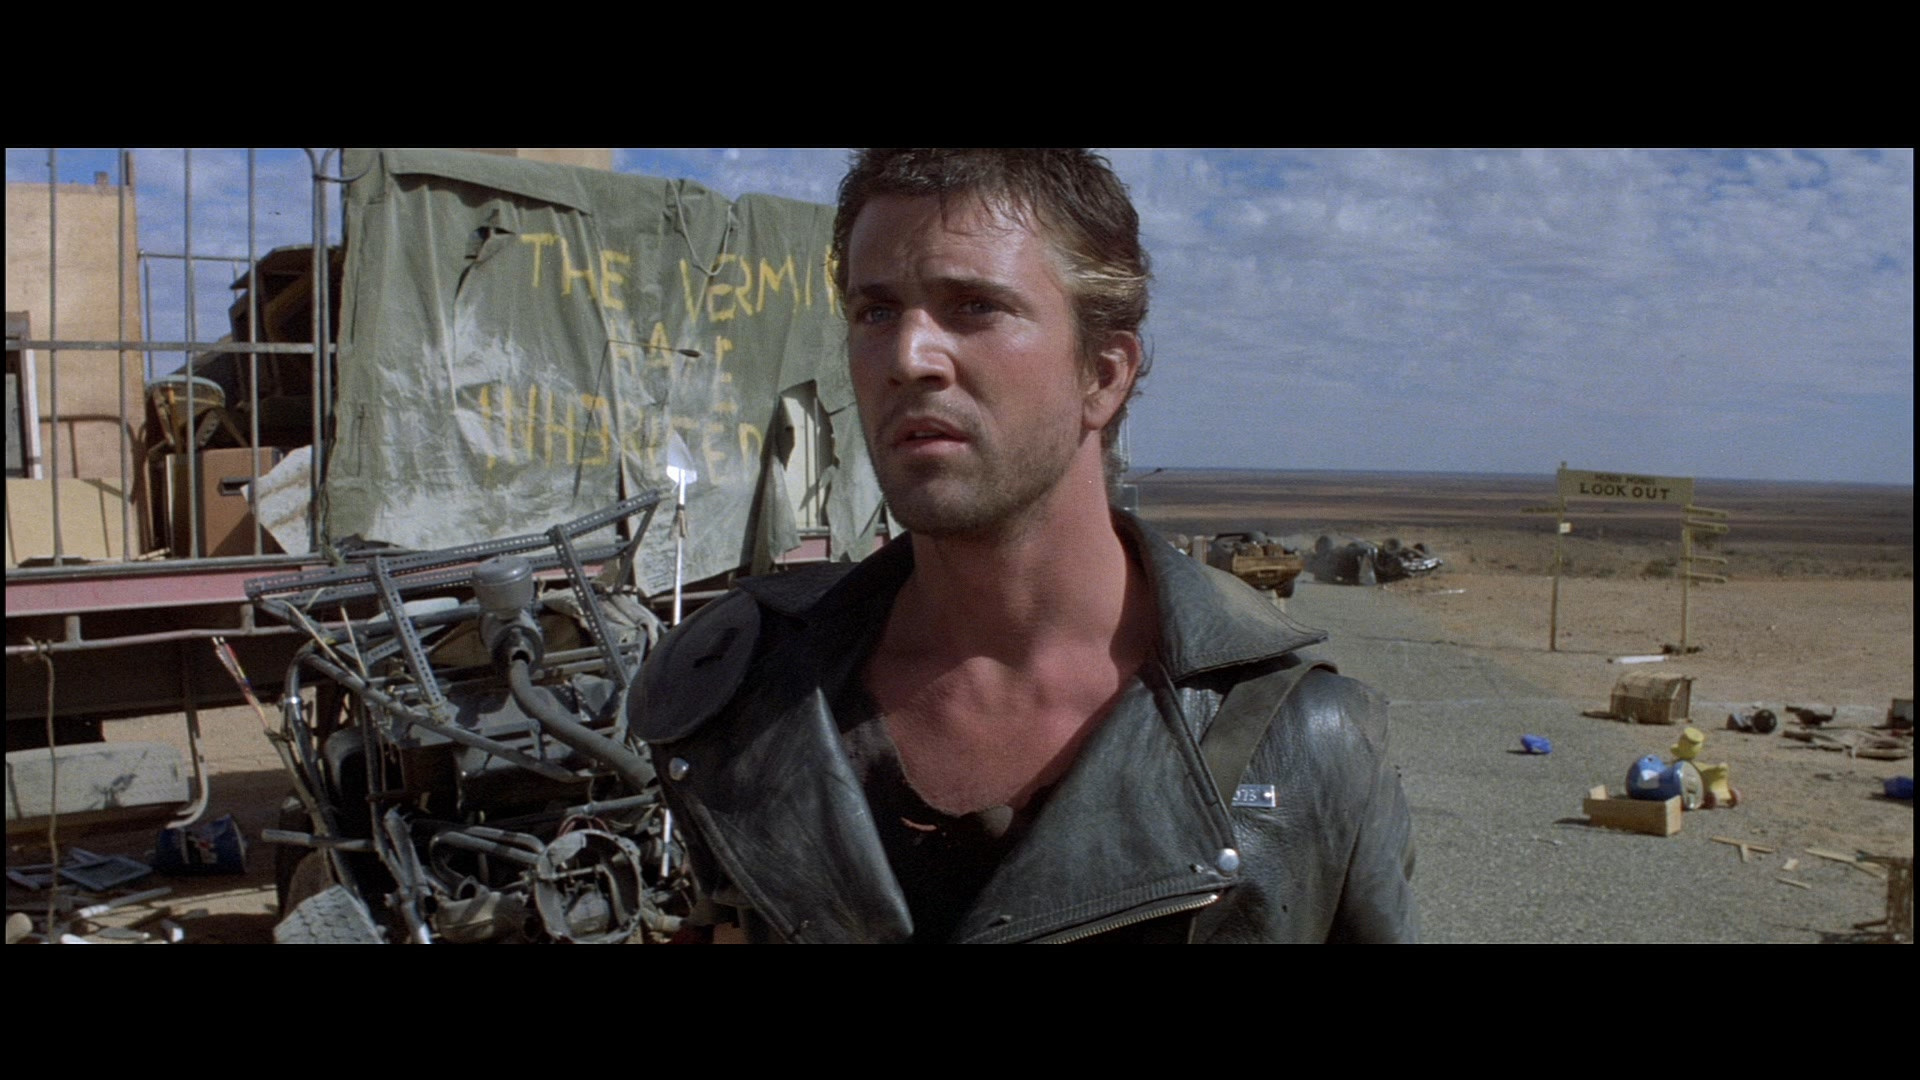 1920x1080 ... Max looks worried in The Road Warrior - Movie Screencaps ...